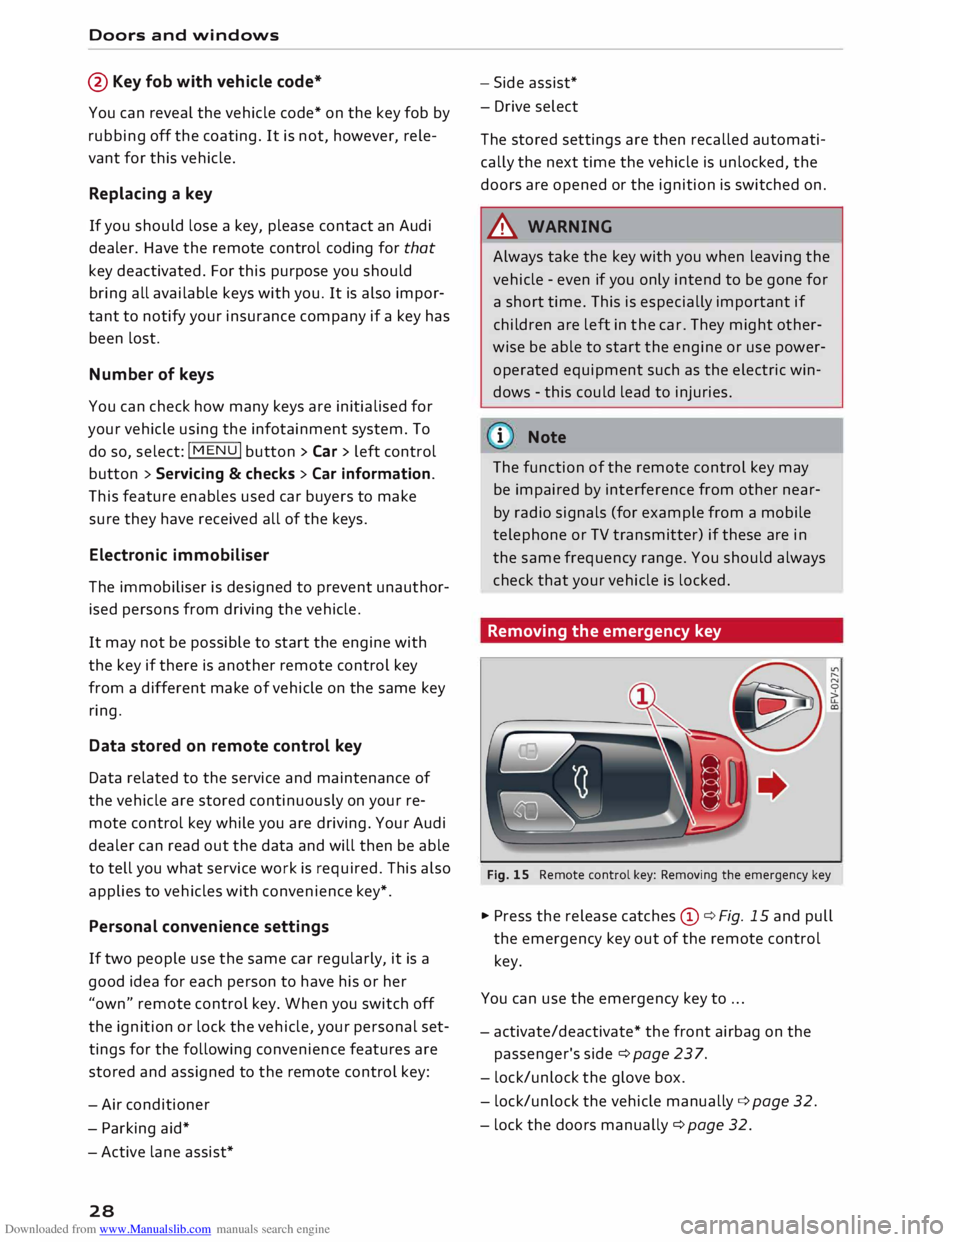 AUDI TT ROADSTER 2016  Owners Manual Downloaded from www.Manualslib.com manuals search engine Doors 
and windows 
@  Key  fob with  vehicle  code* 
You  can reveal  the vehicle  code* on the  key  fob  by 
rubbing  off the coating.  It i